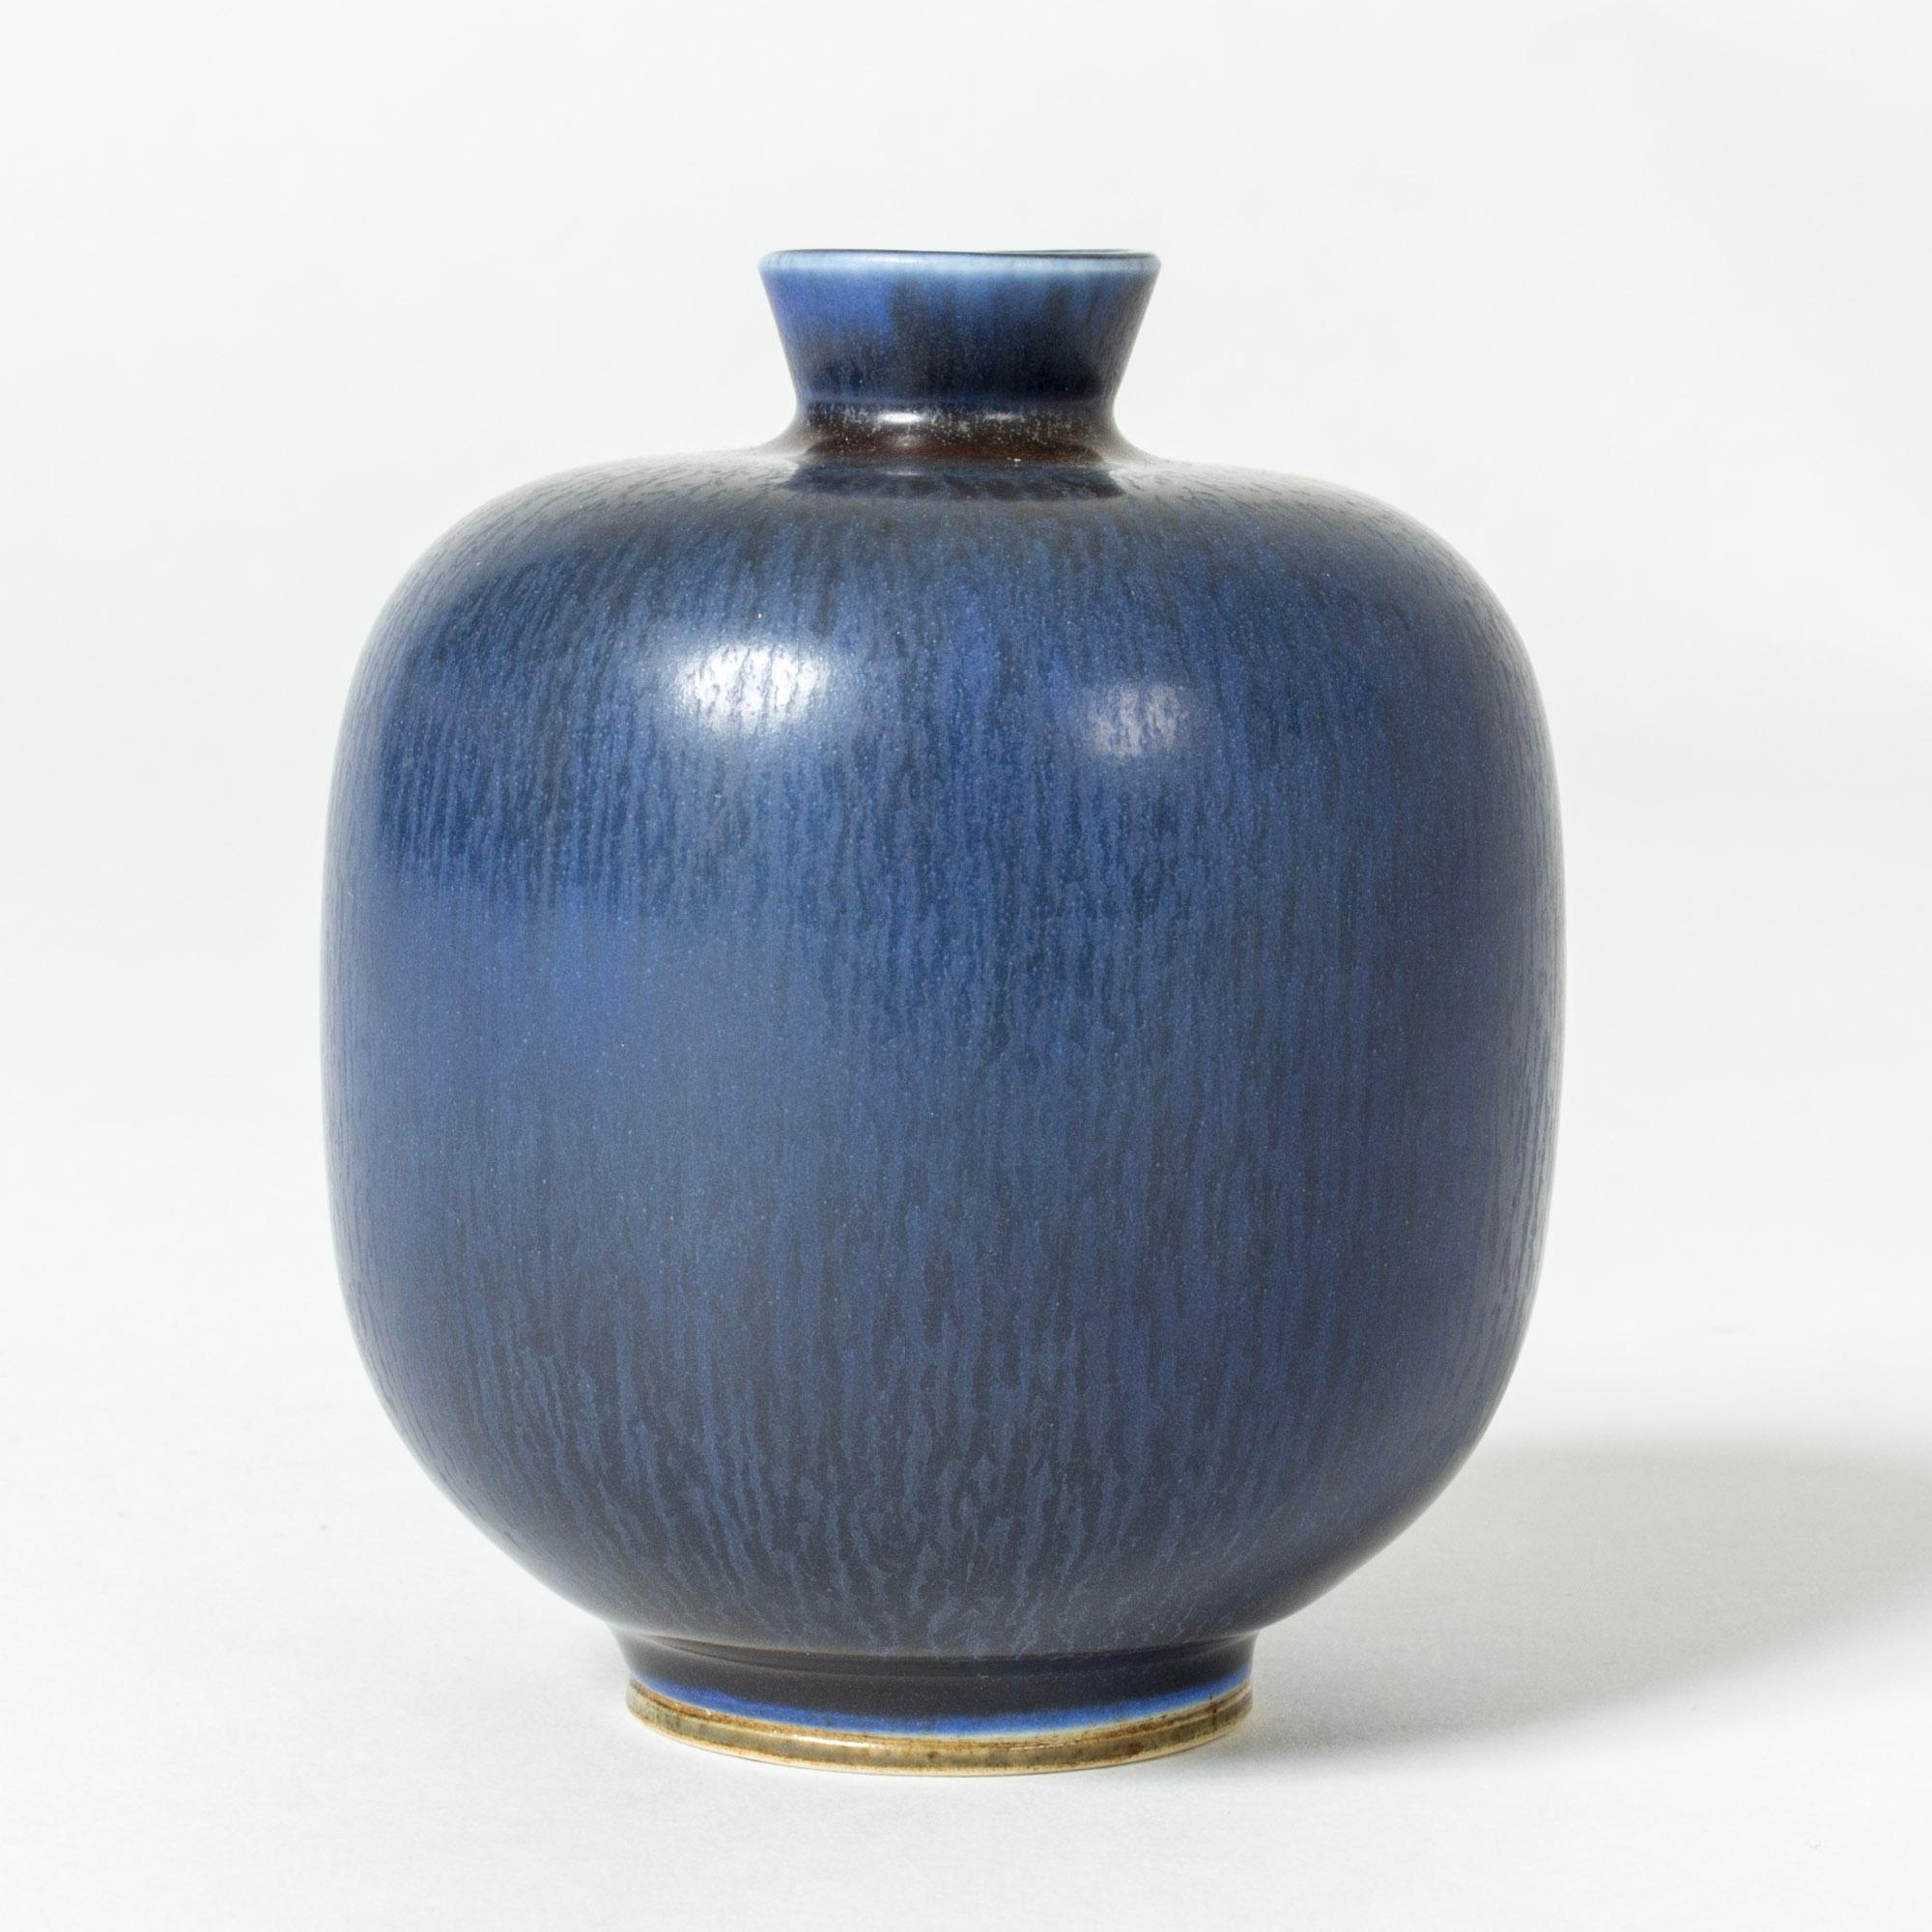 Small stoneware vase by Berndt Friberg, in a stout form with elegant blue hare’s fur glaze.

Berndt Friberg was a Swedish ceramicist, renowned for his stoneware vases and vessels for Gustavsberg. His pure, composed designs with satiny, compelling